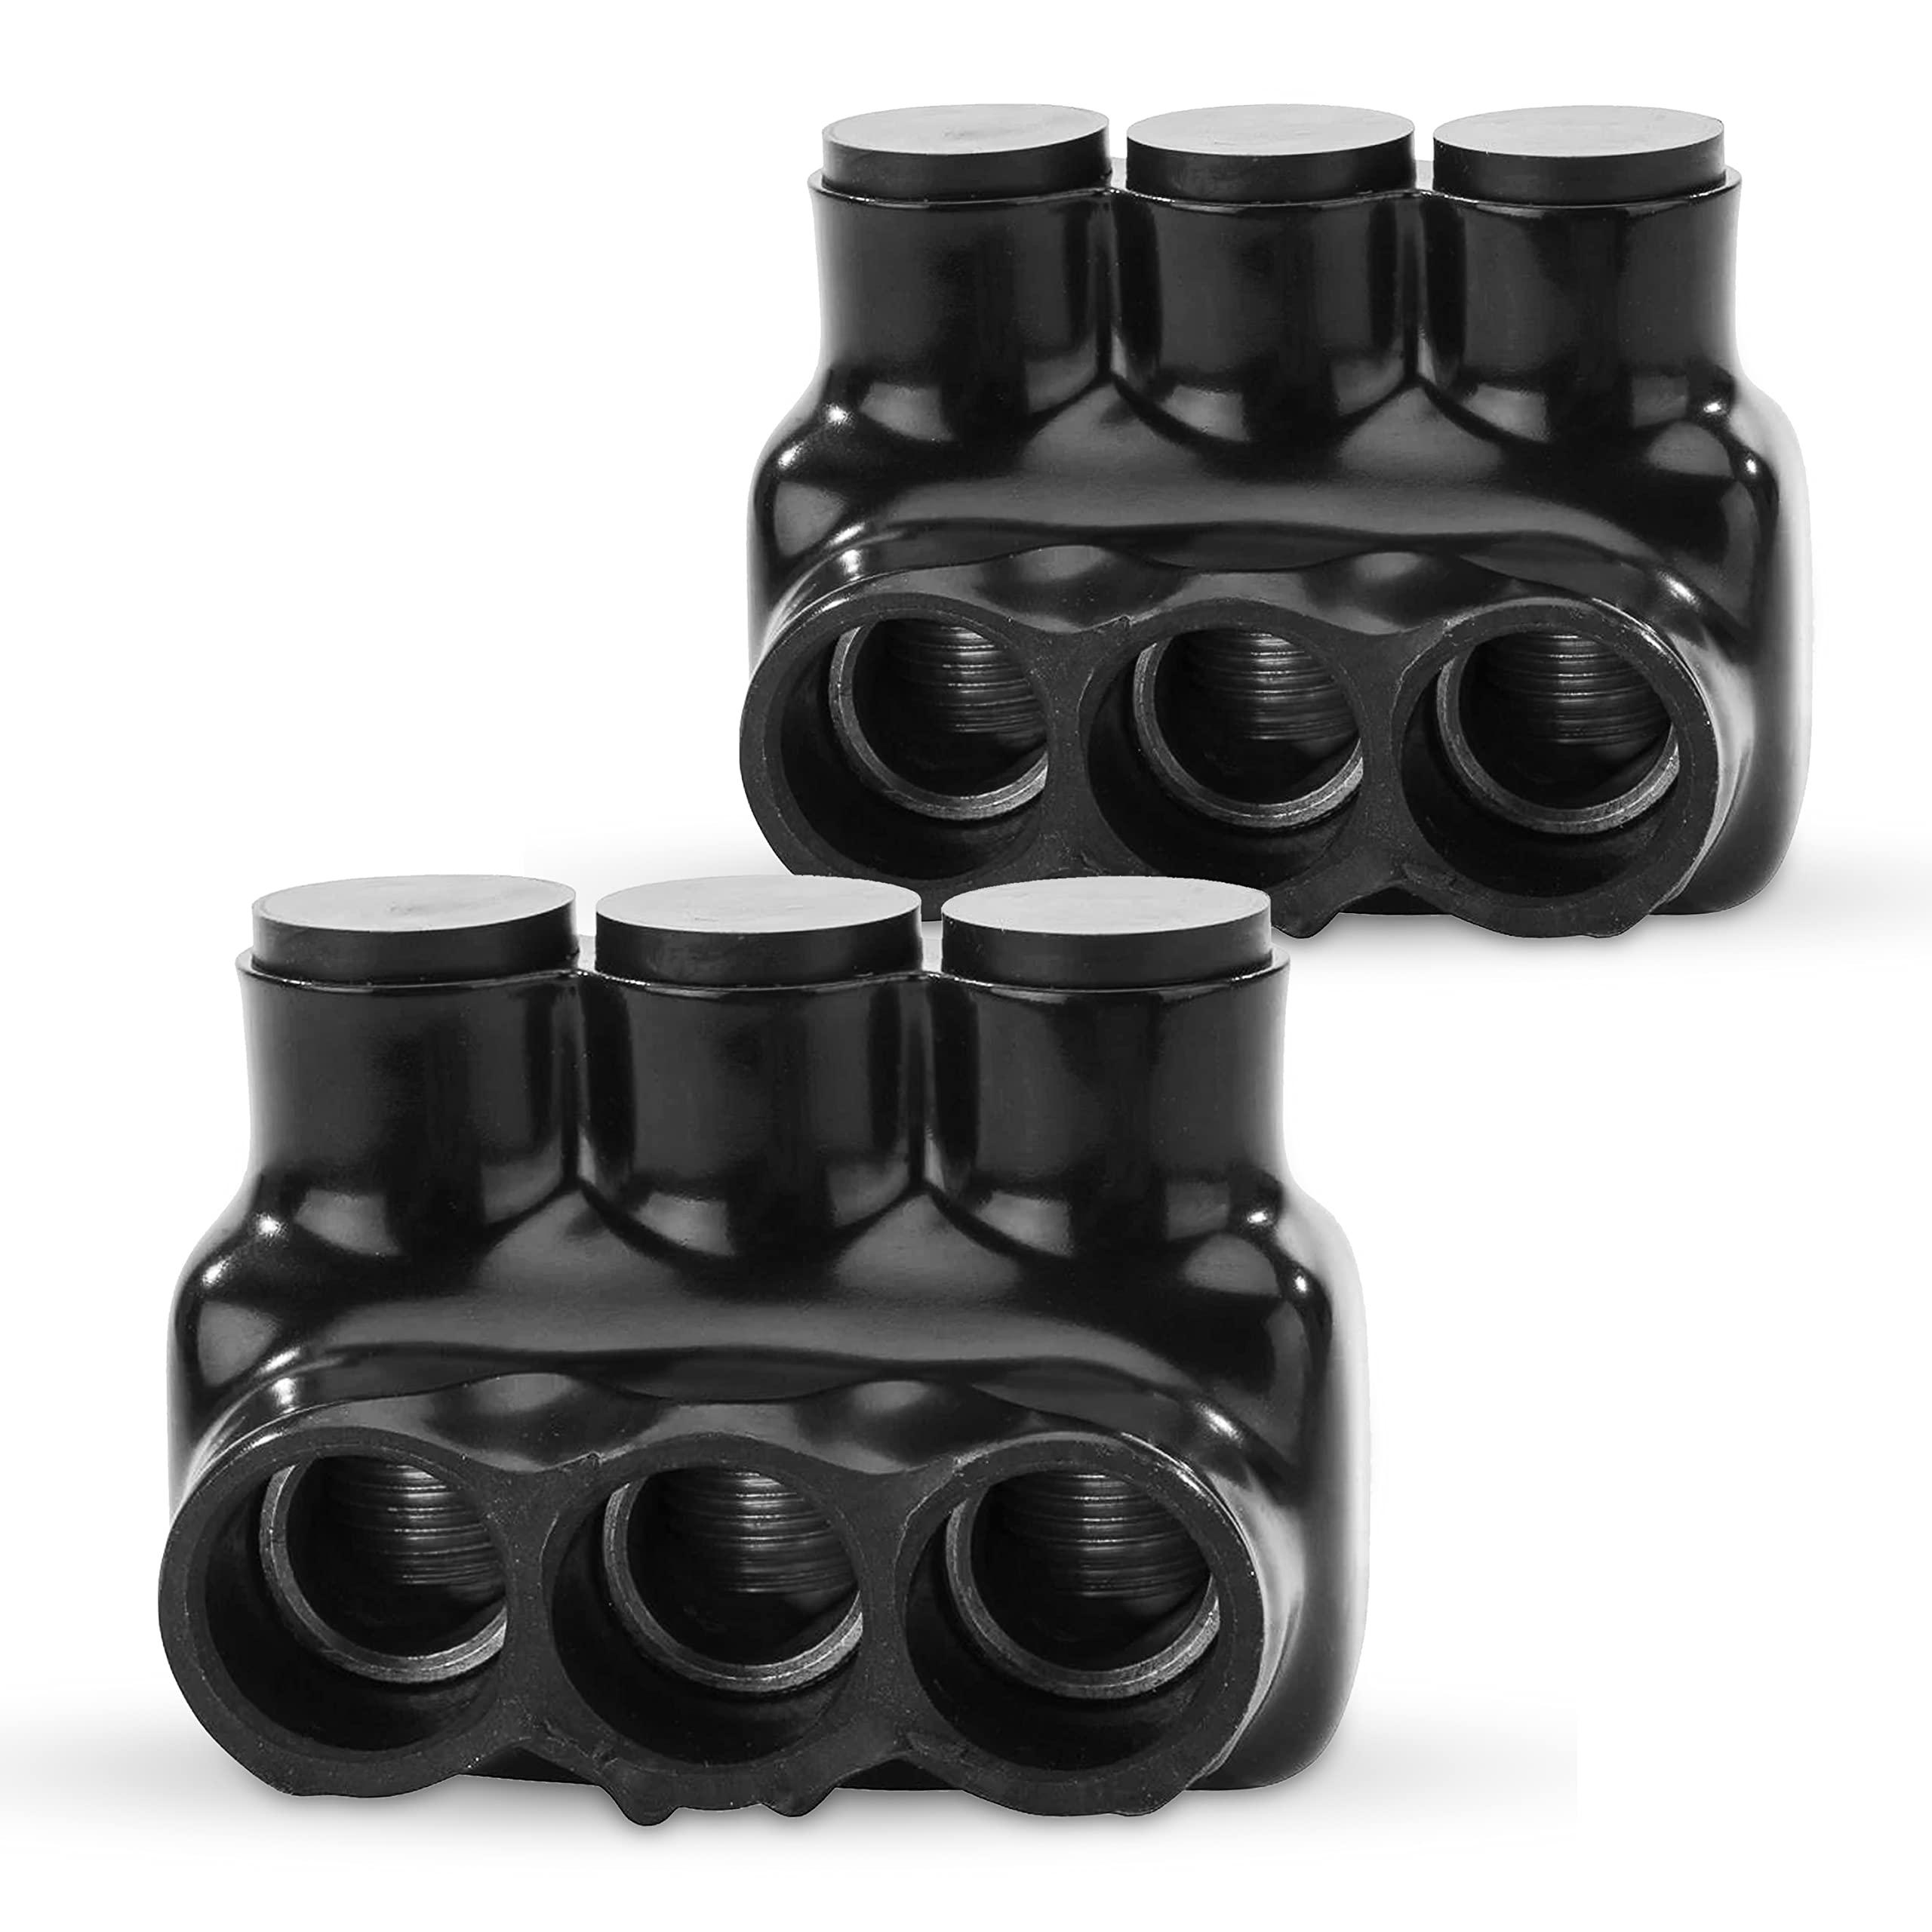 ohlectric multi cable connectors with 3 wire ports - dual entry polaris connector - black insulated vinyl coated wire connect